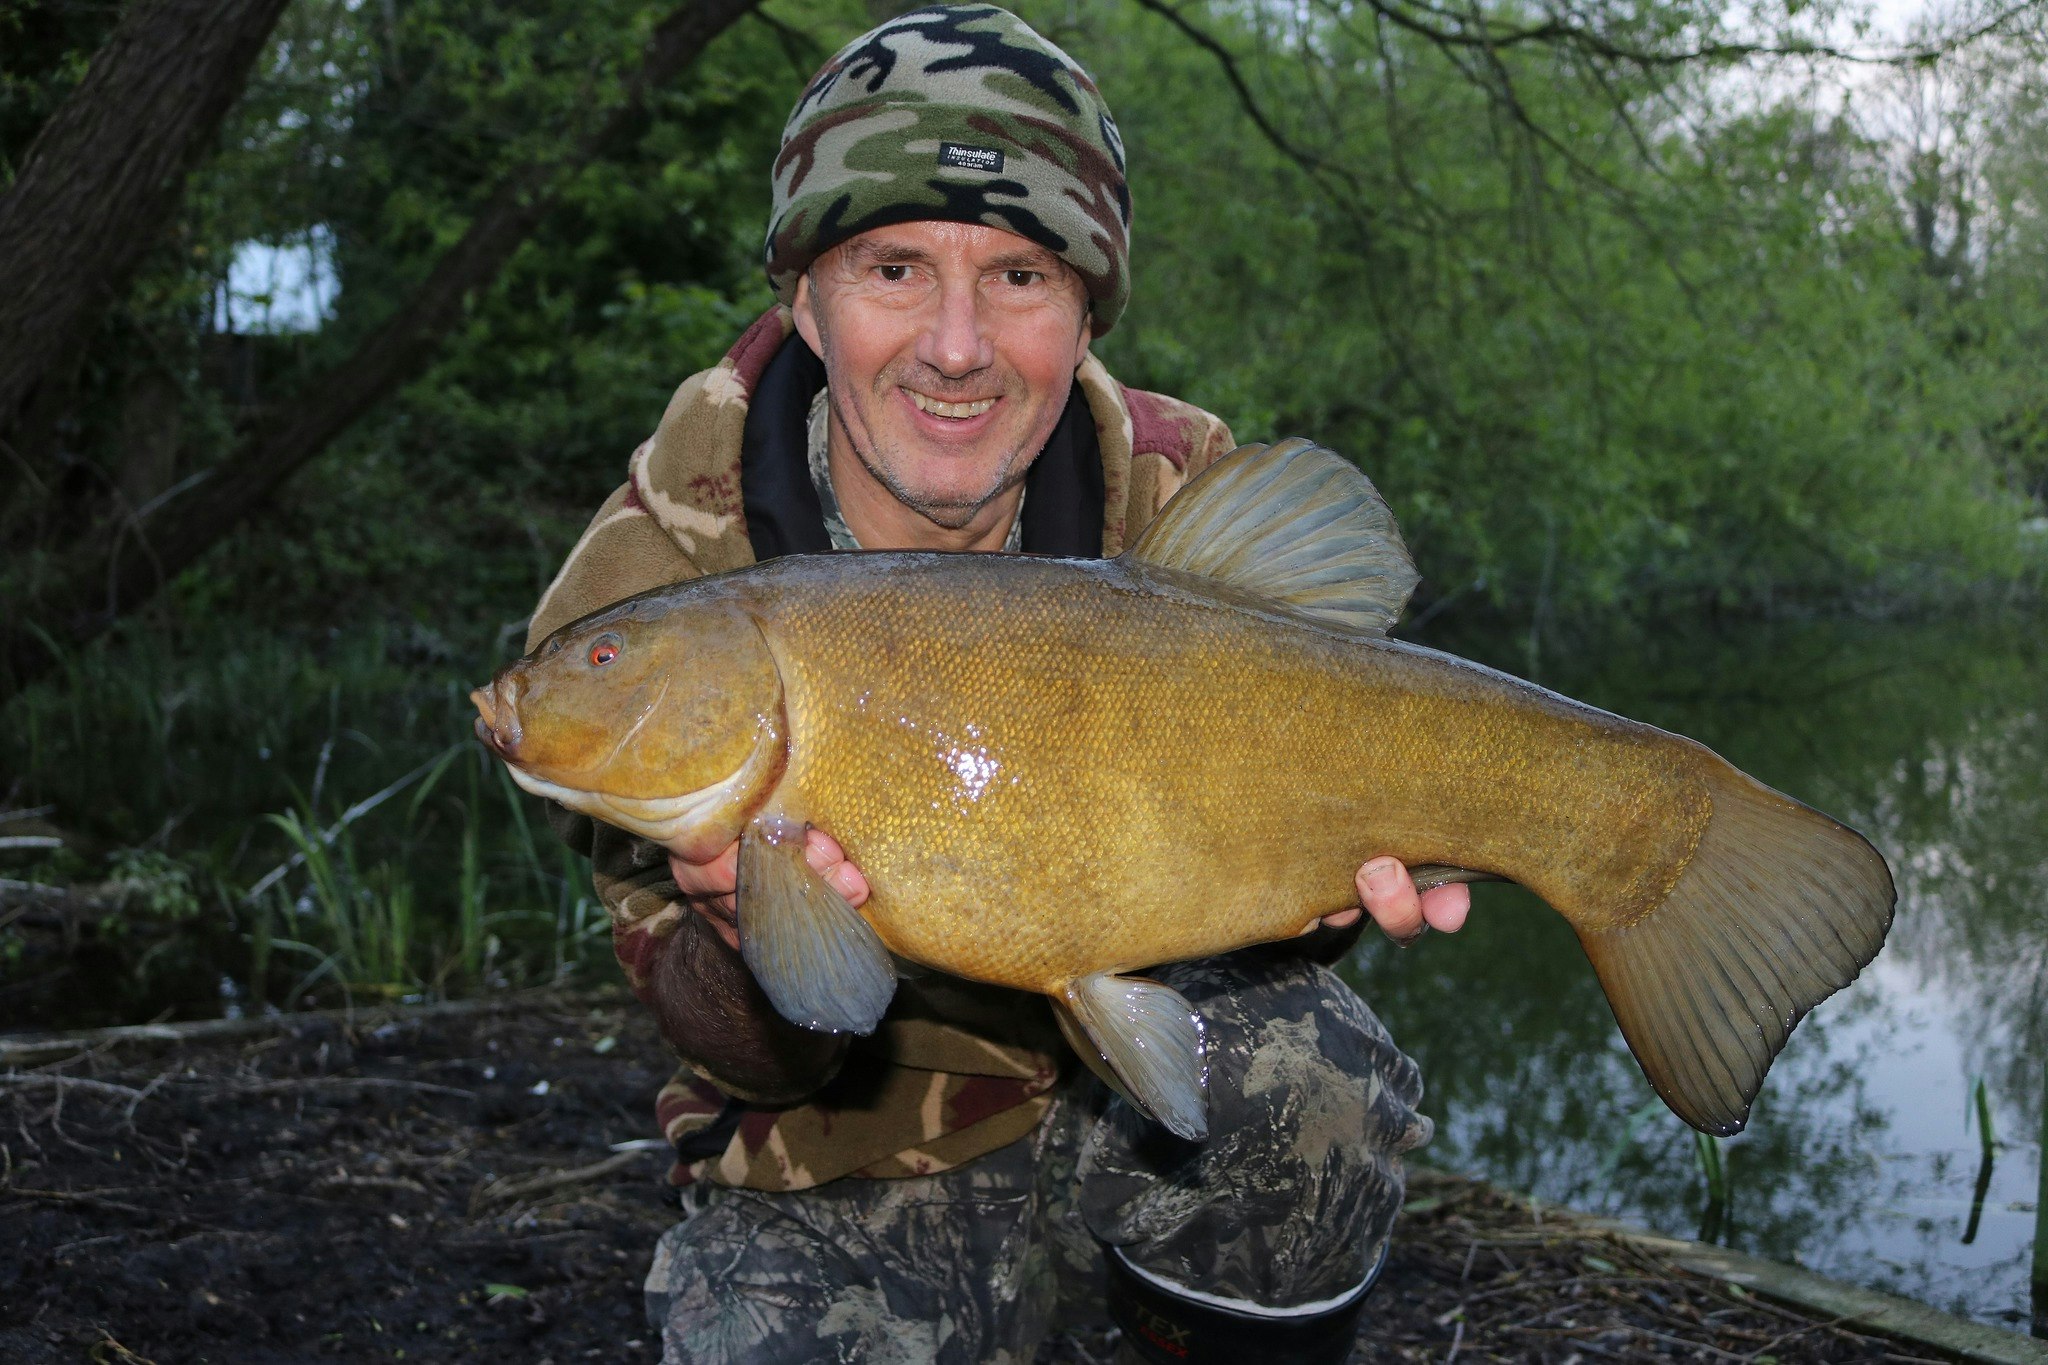 Lee Fisher with a fantastic example of a tench.